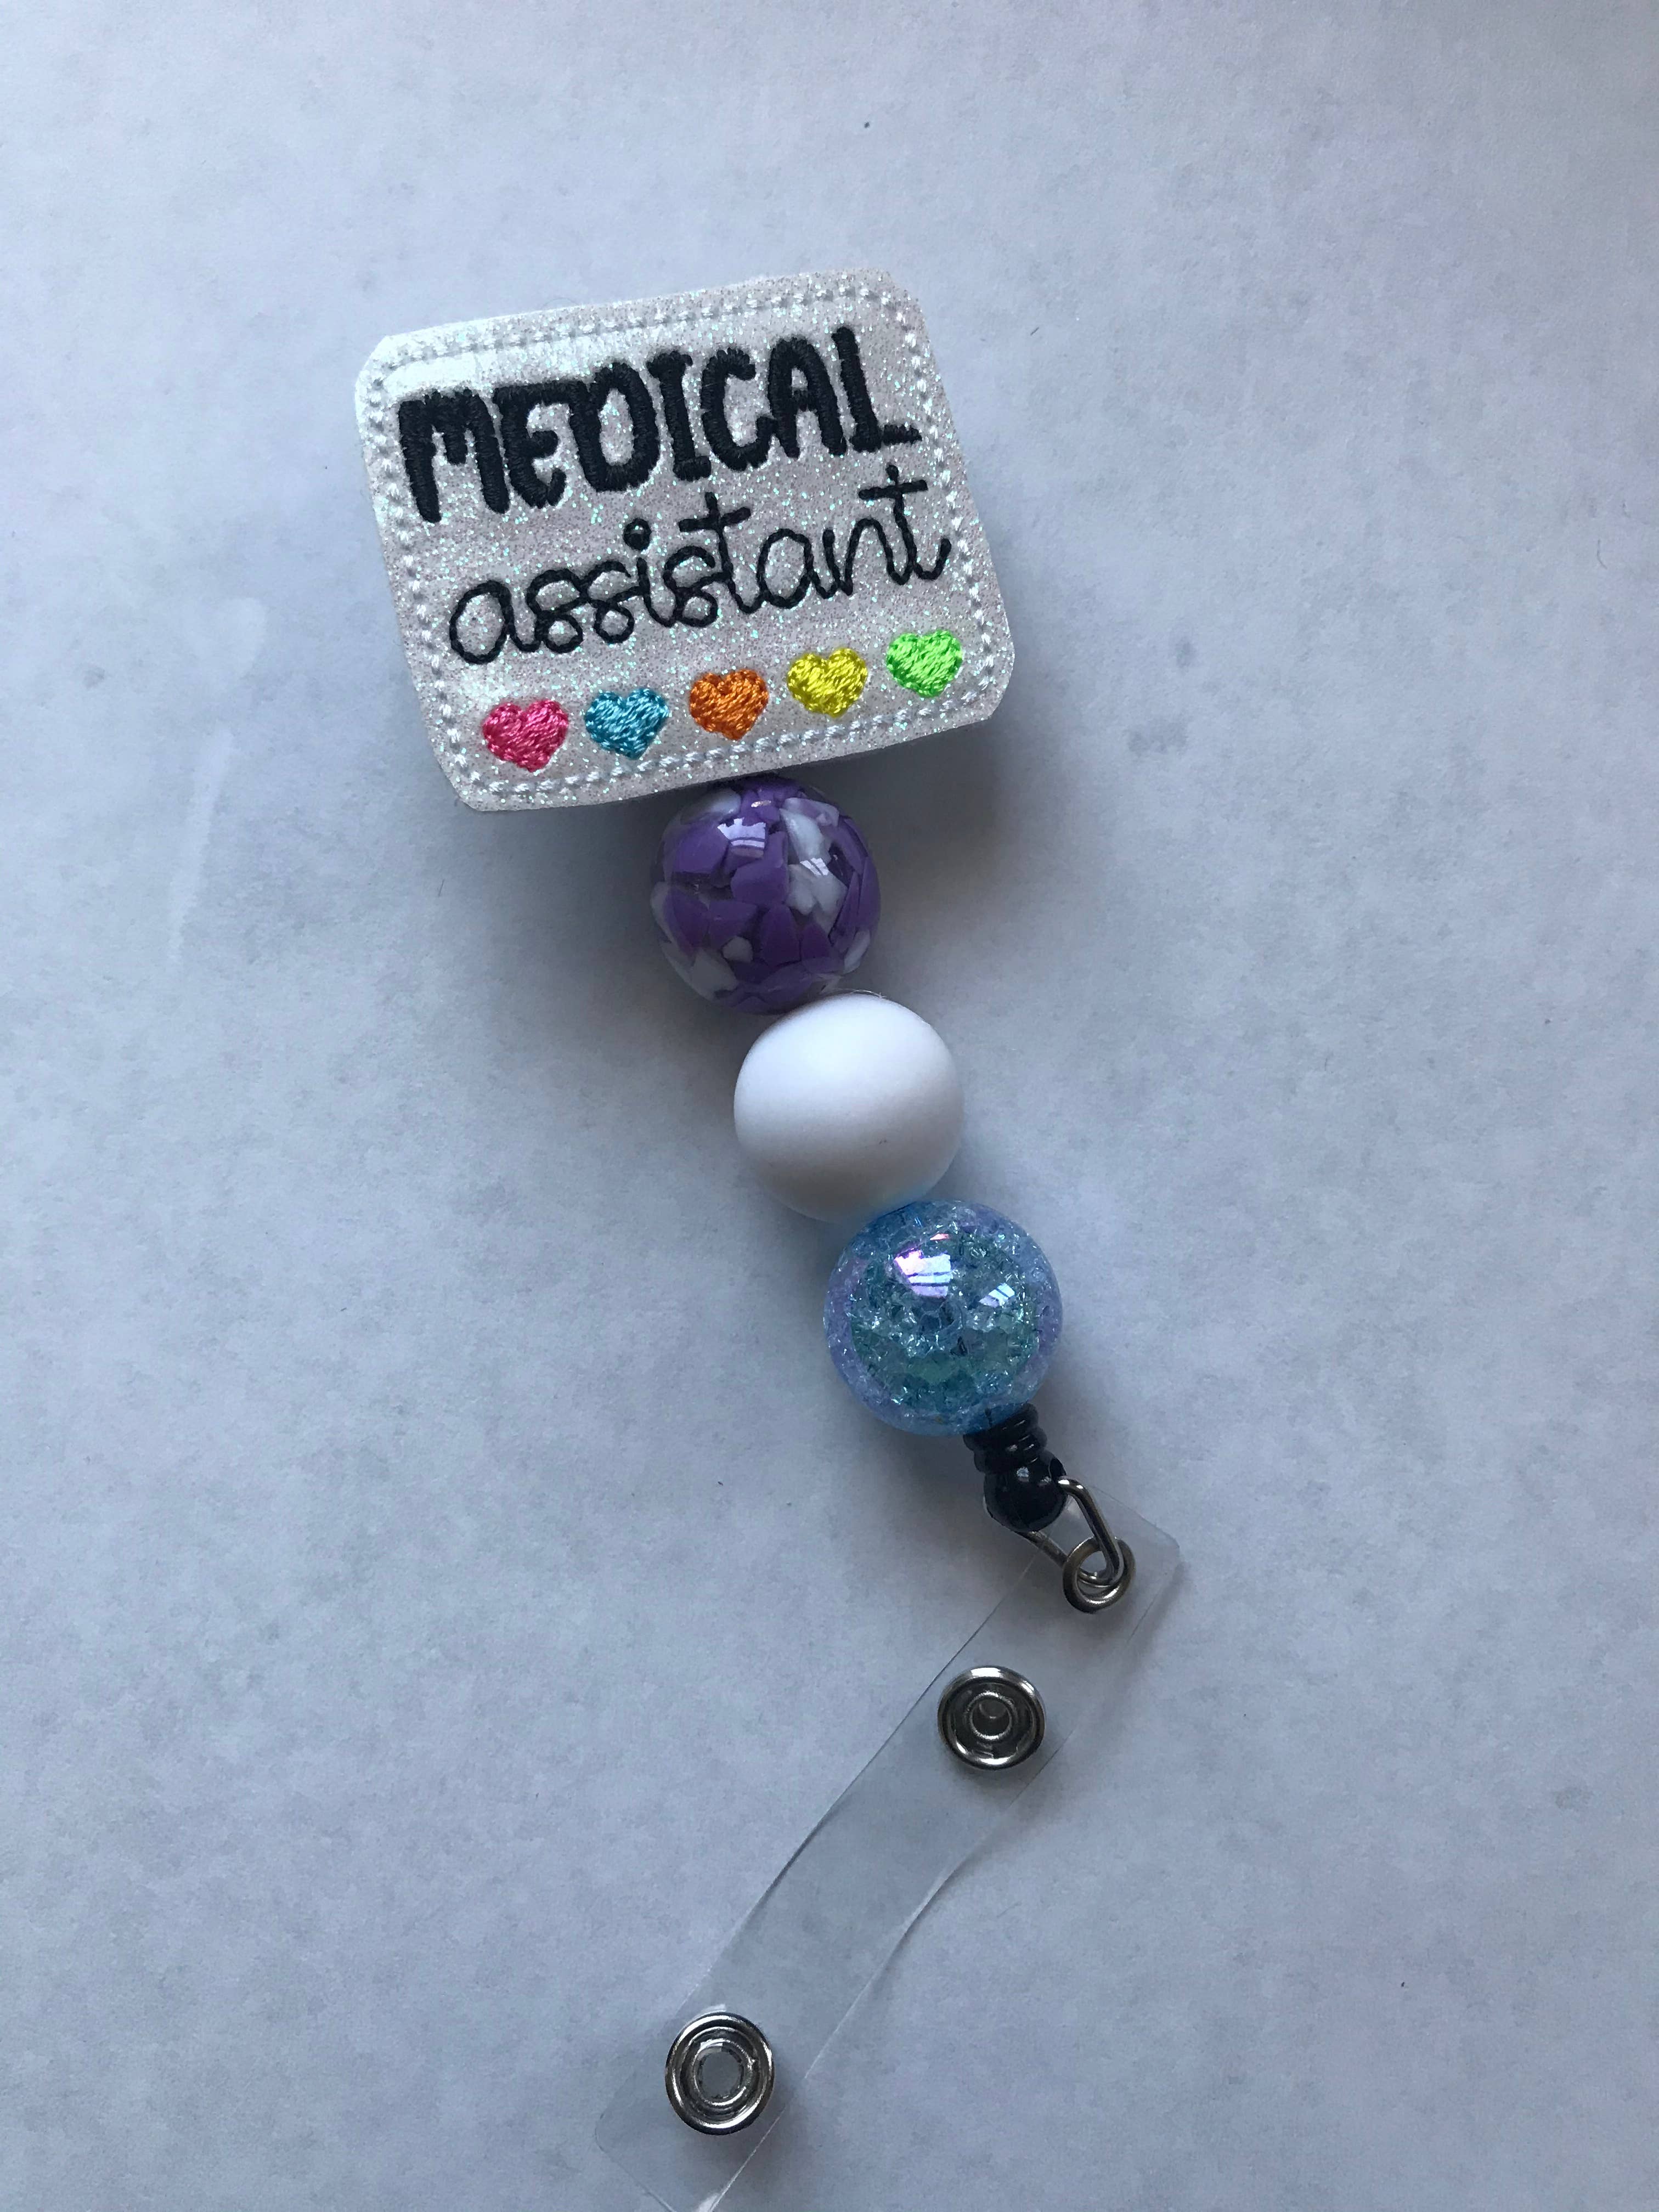 Wholesale Badge Reel - Medical Assistant for your store - Faire